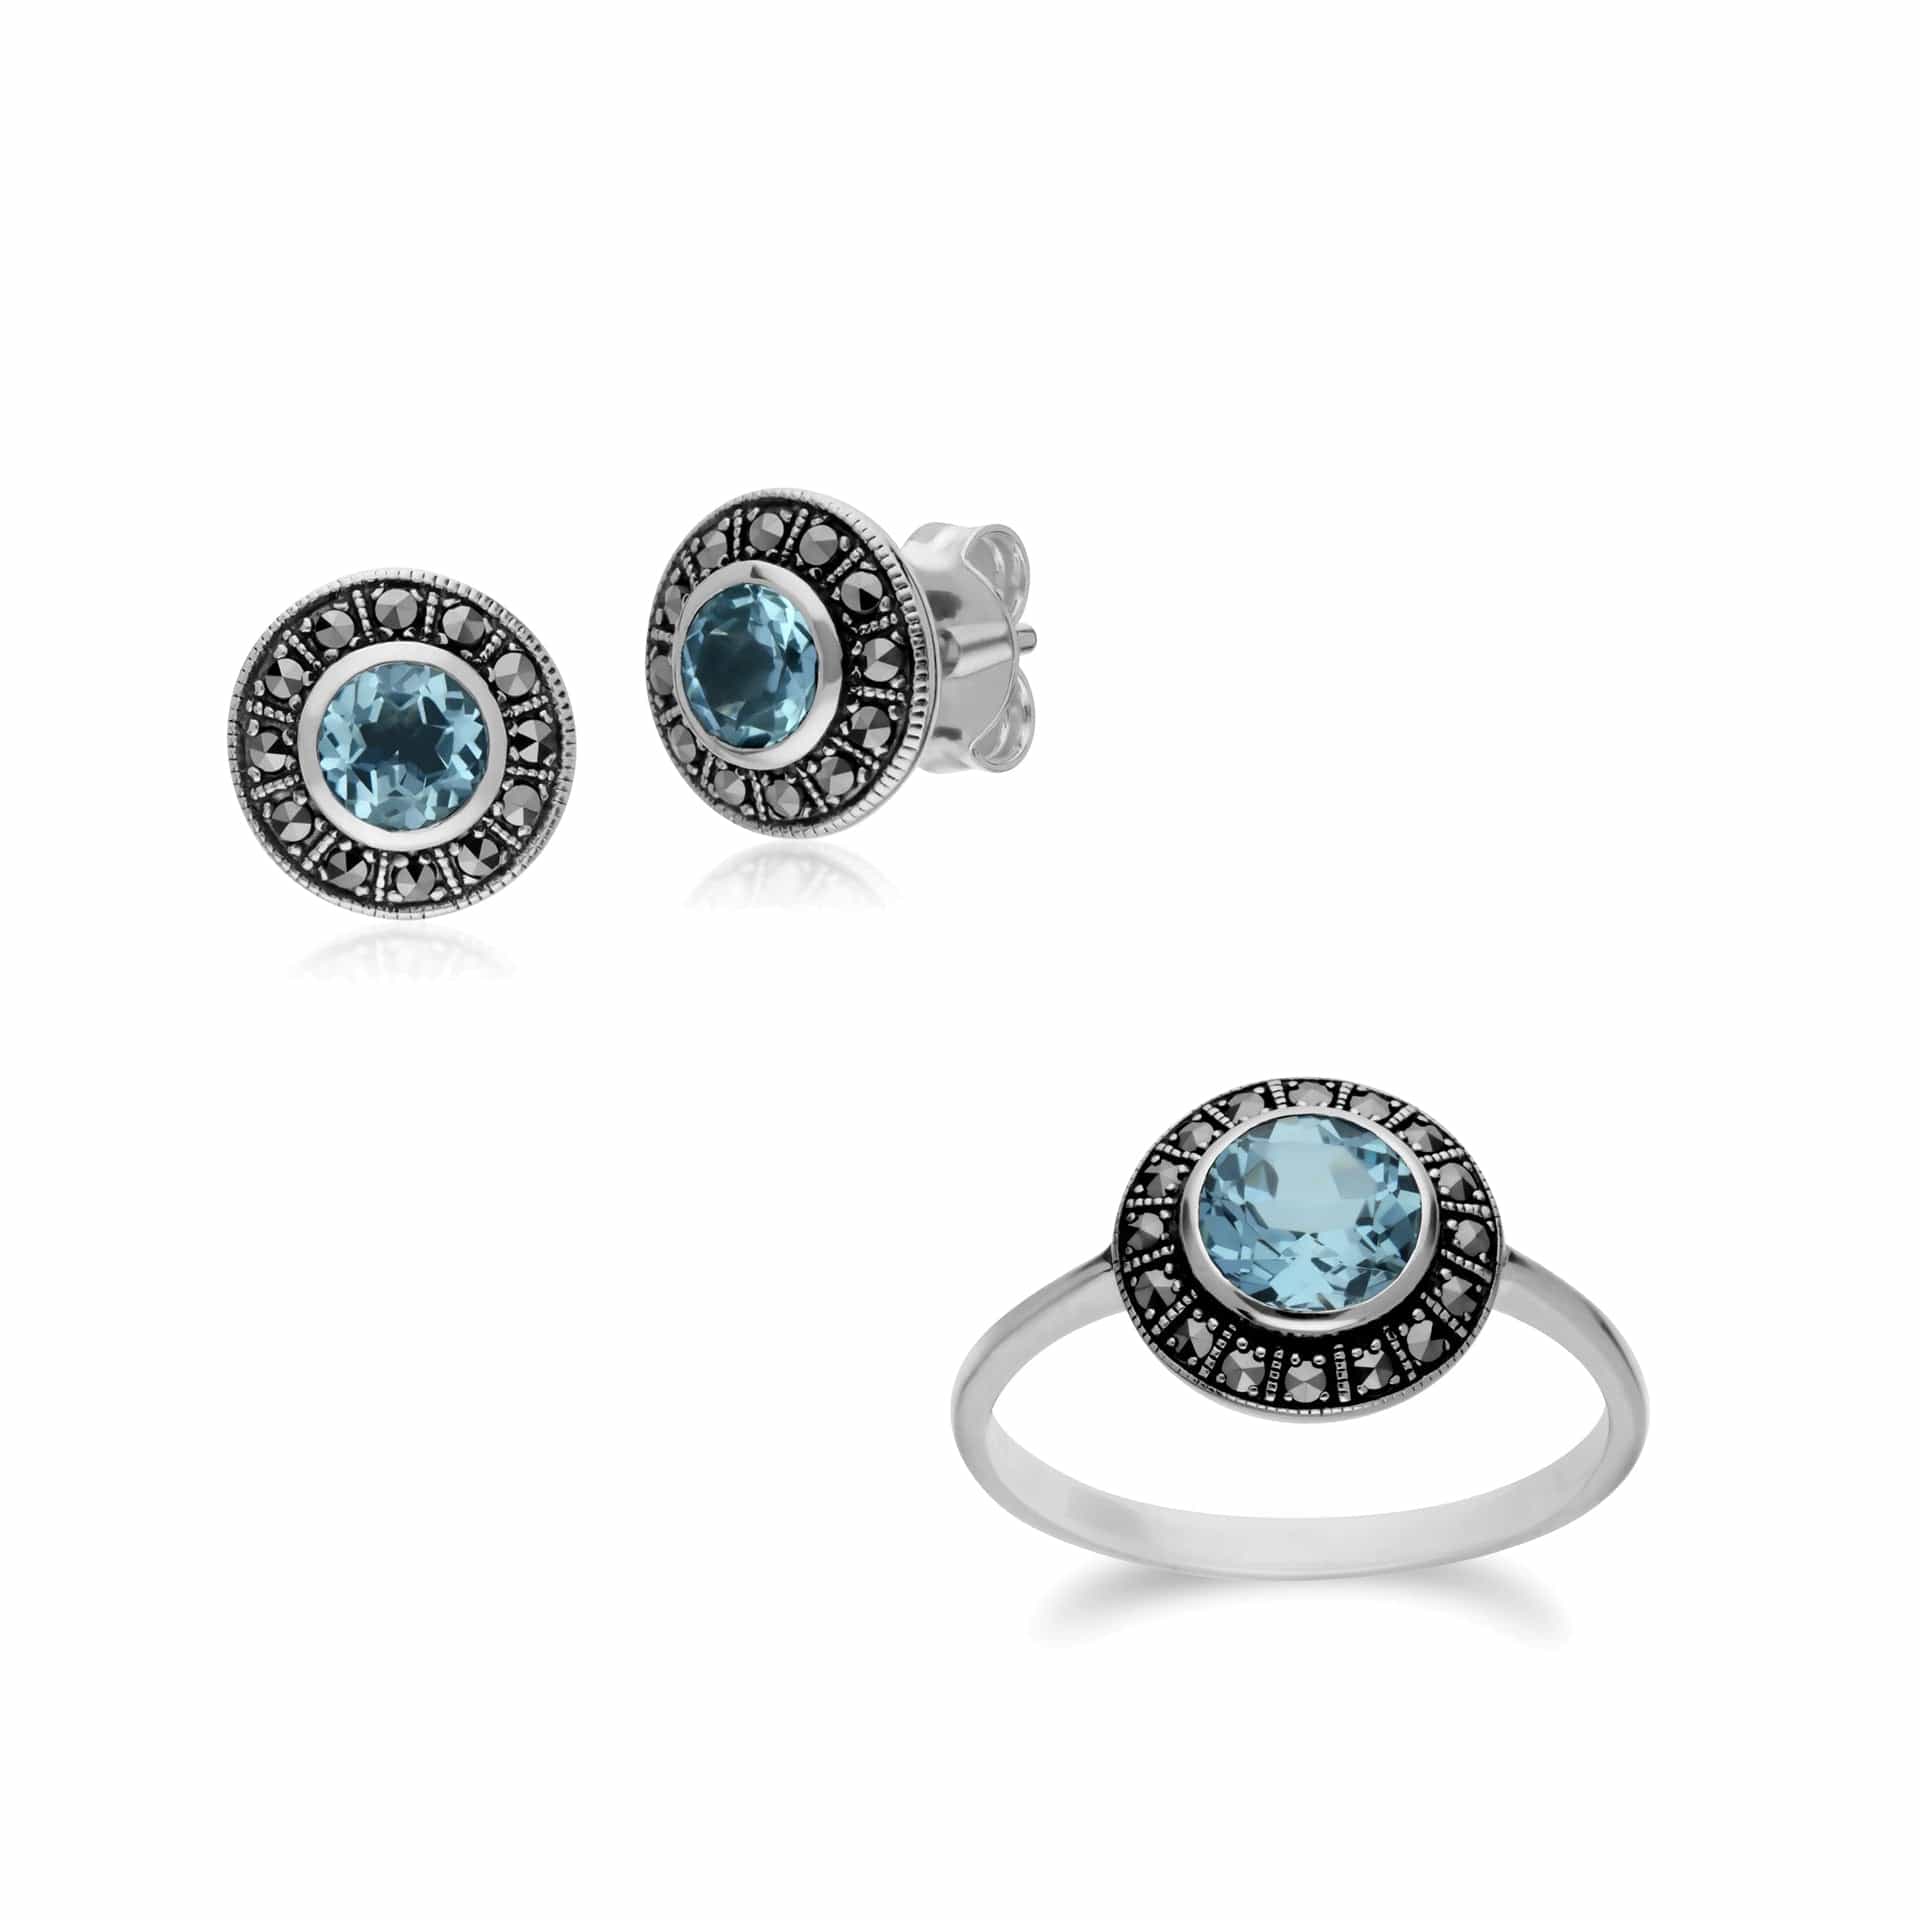 214E872702925-214R605701925 Art Deco Style Oval Blue Topaz and Marcasite Cluster Stud Earrings & Ring Set in 925 Sterling Silver 1